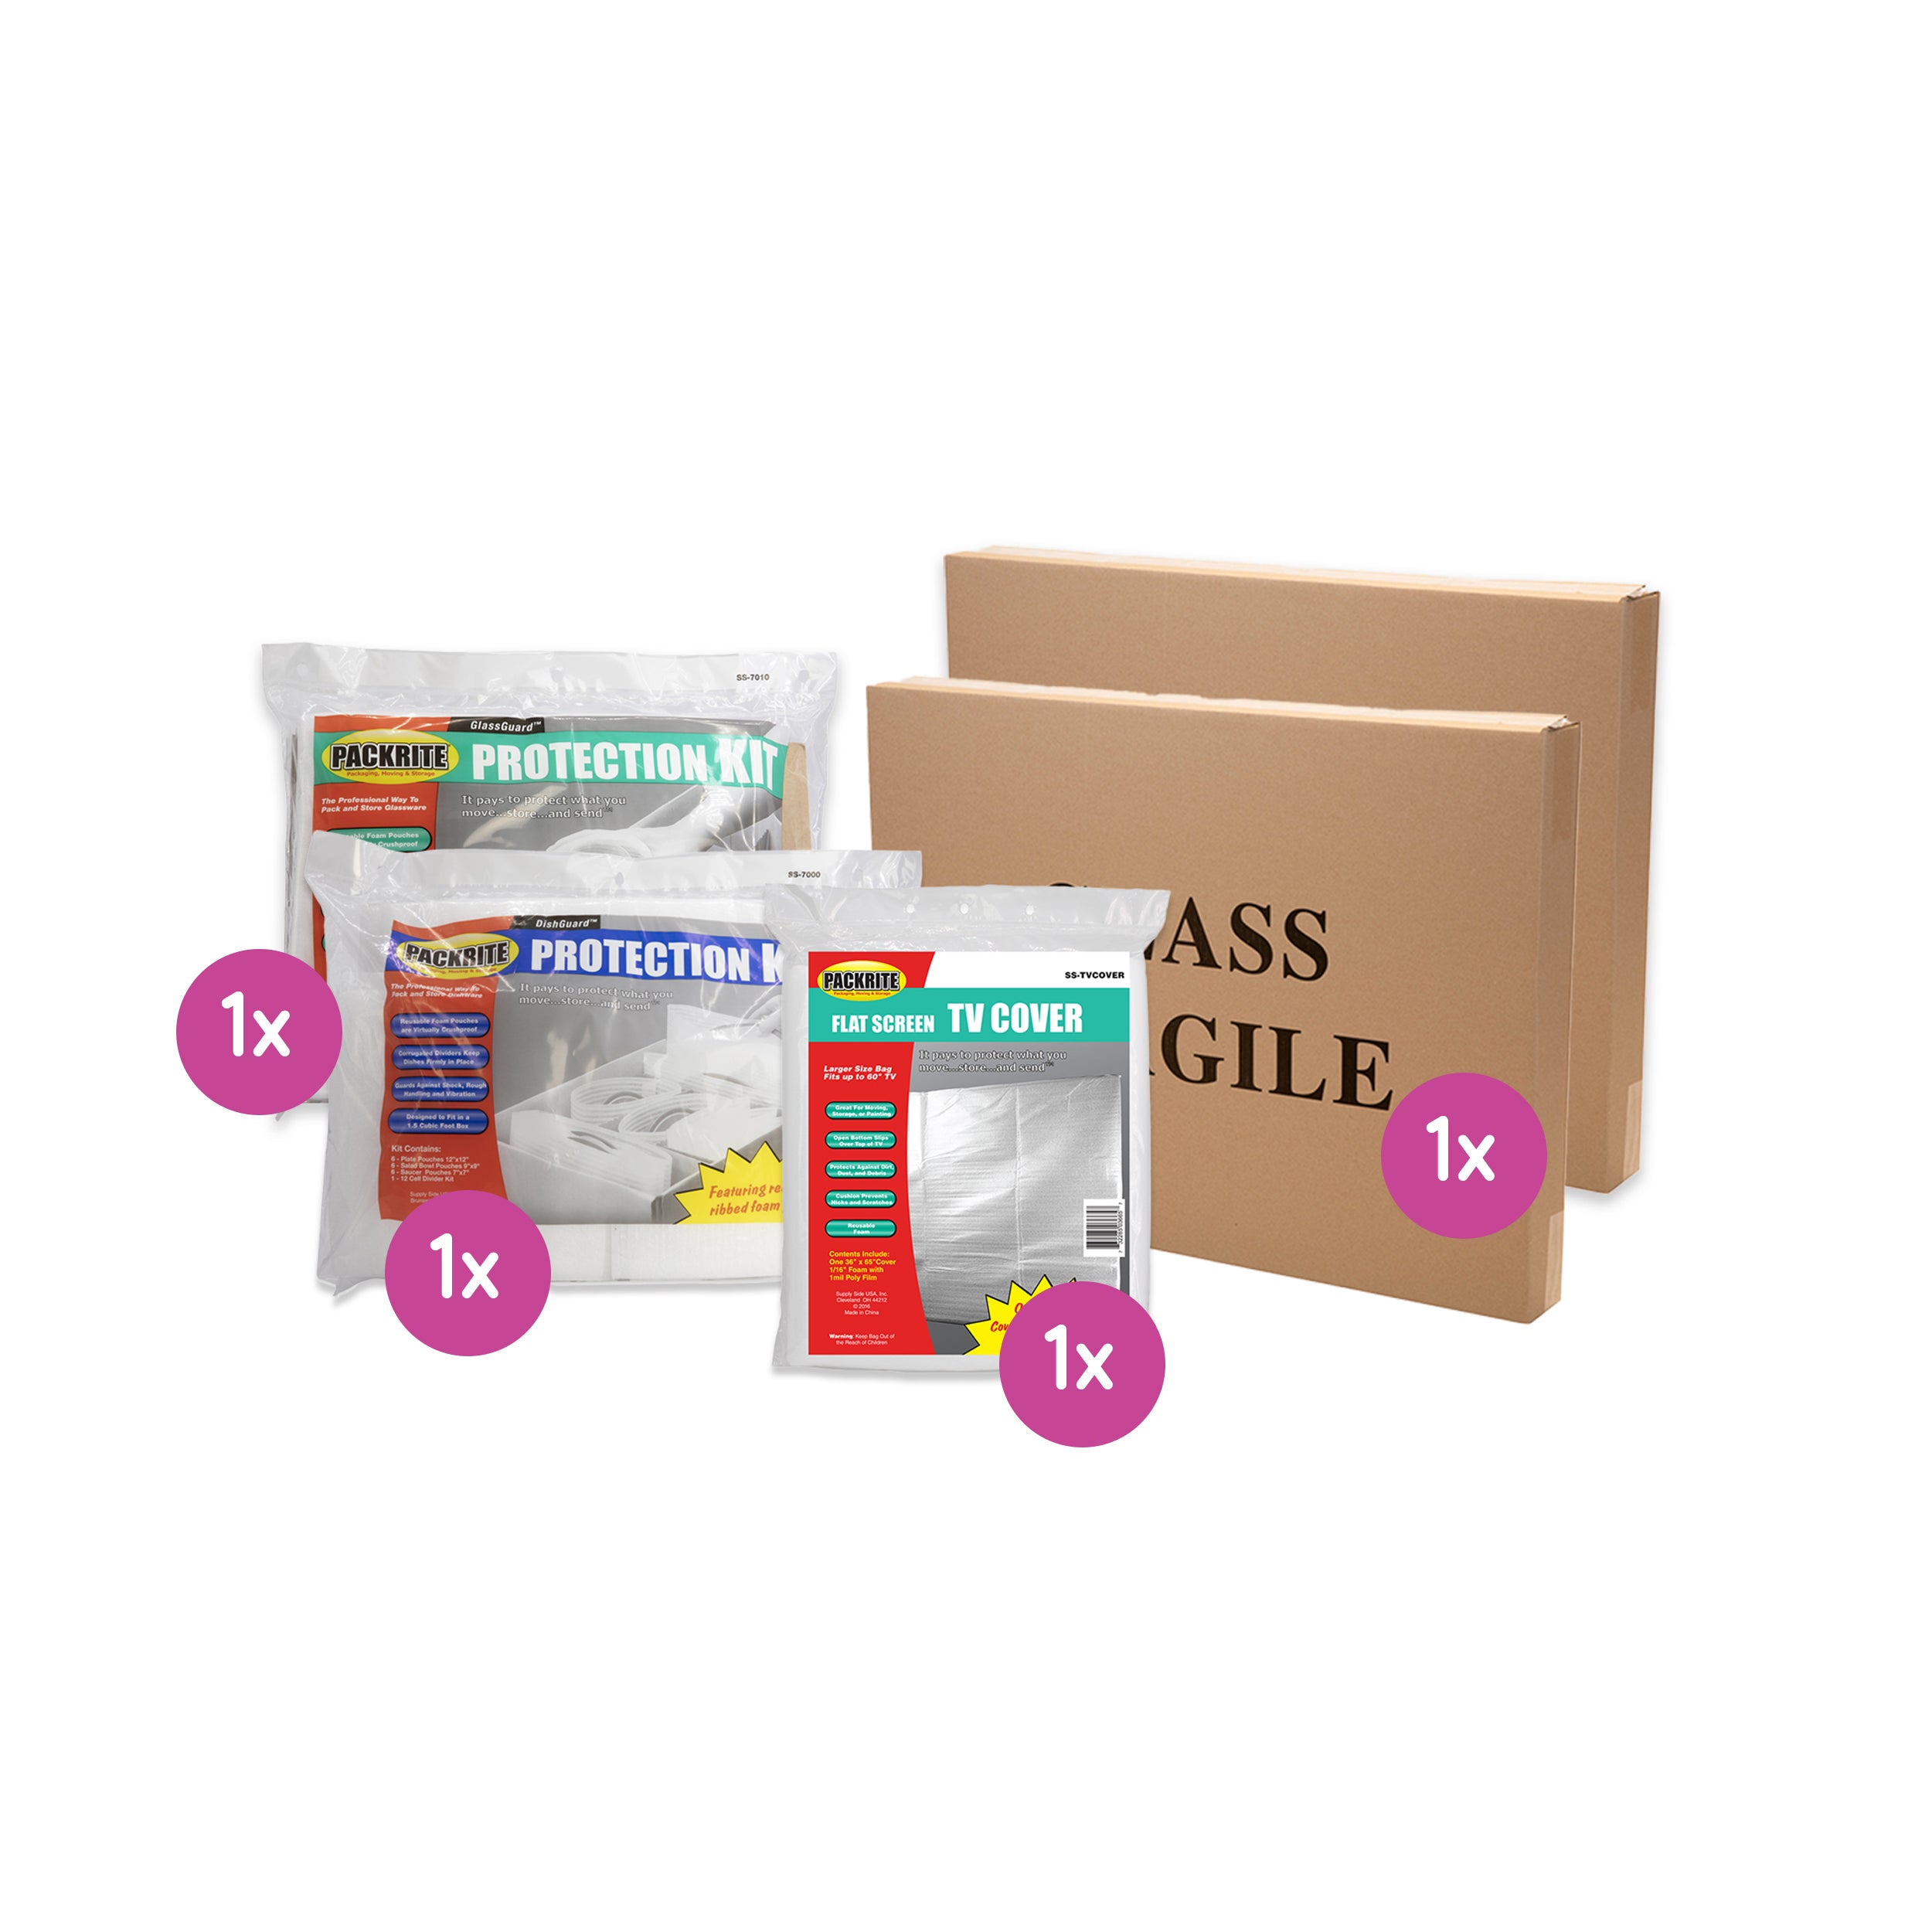 Protection Plus Accessory Kit